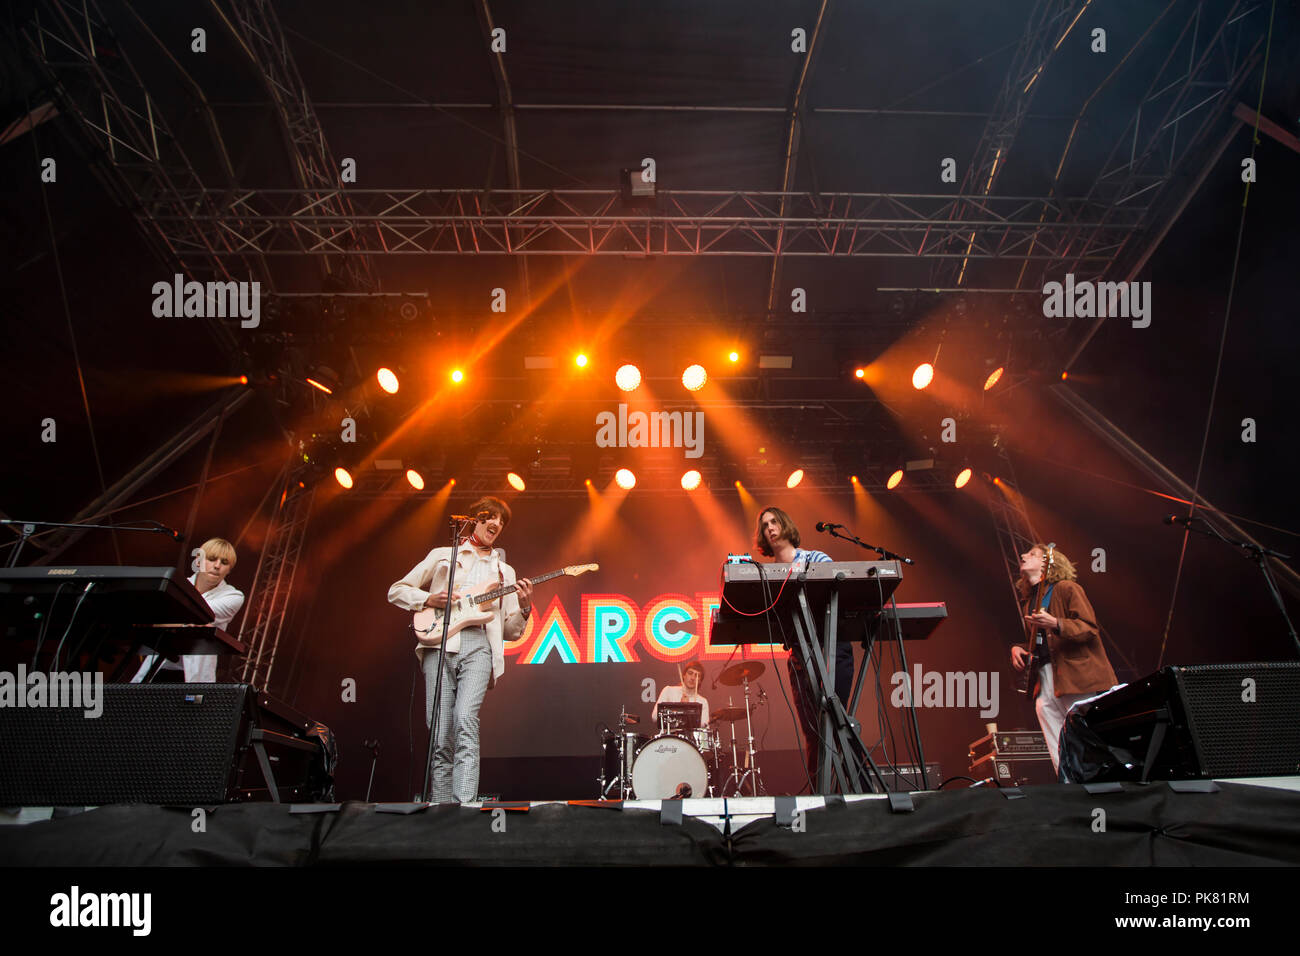 Norway, Bergen - June 16, 2018. The Australian band Parcels performs a live concert during the Norwegian music festival Bergenfest 2018 in Bergen. (Photo credit: Gonzales Photo - Jarle H. Moe). Stock Photo